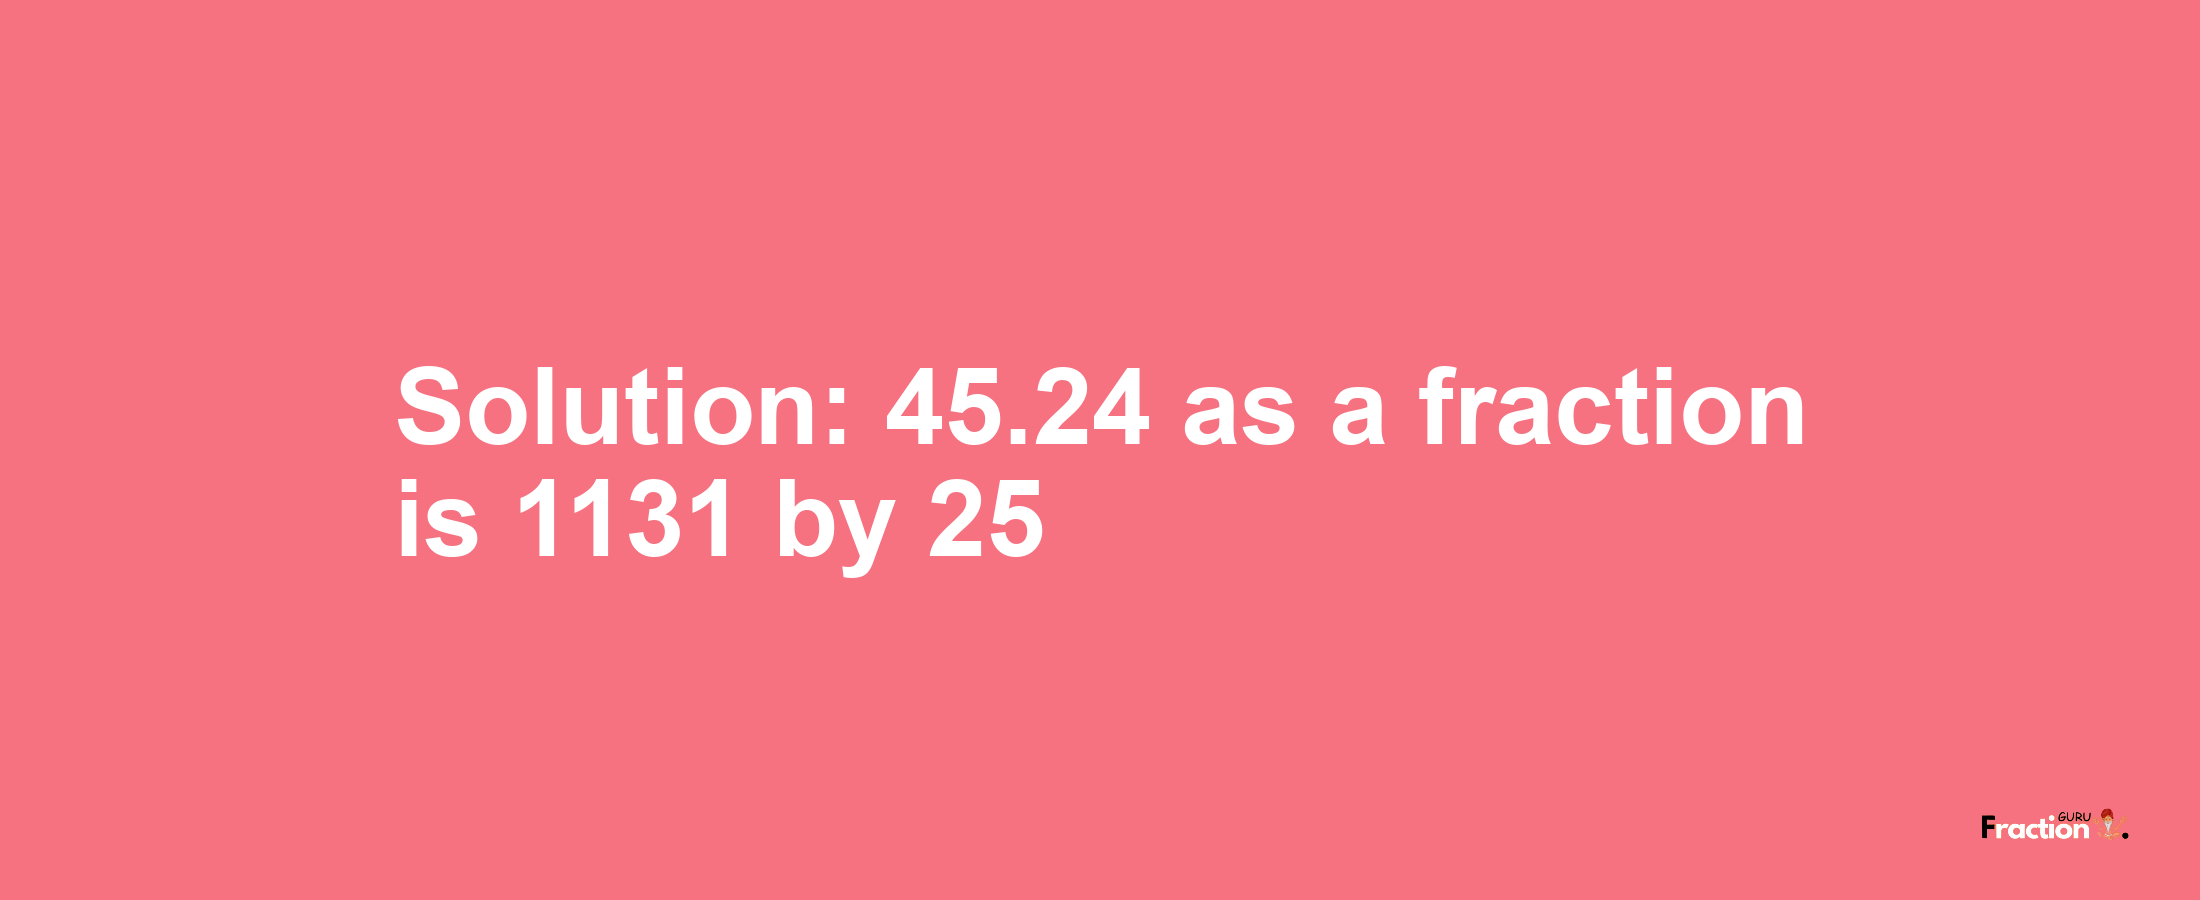 Solution:45.24 as a fraction is 1131/25